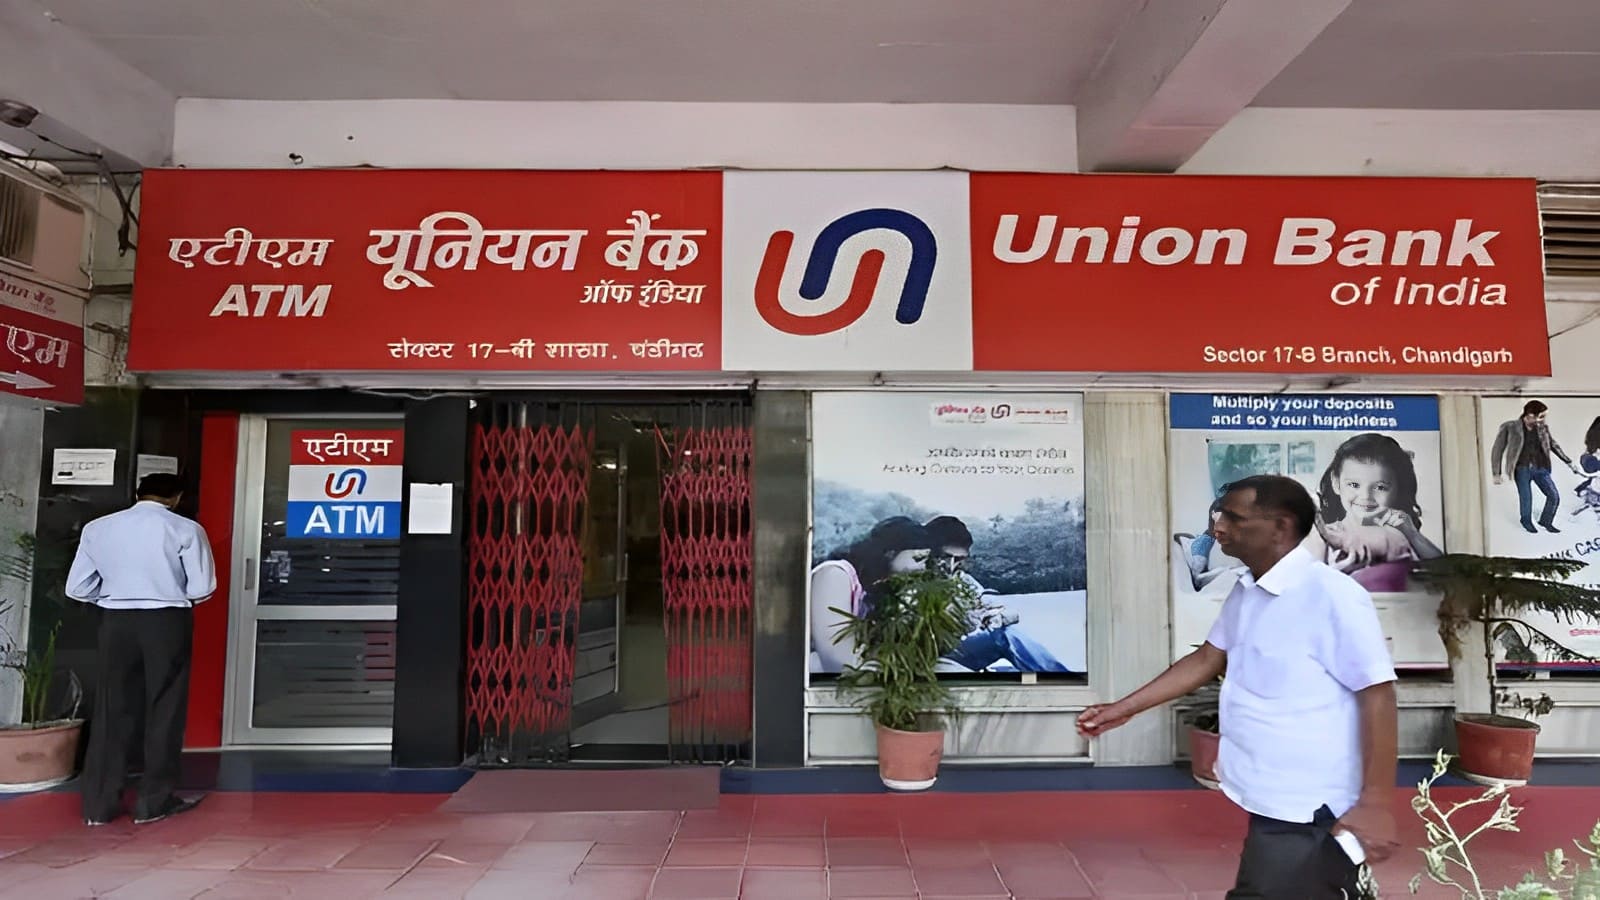 Union Bank of India Q1FY24 Results: Standalone PAT Rises to Rs 3271.65 Cr